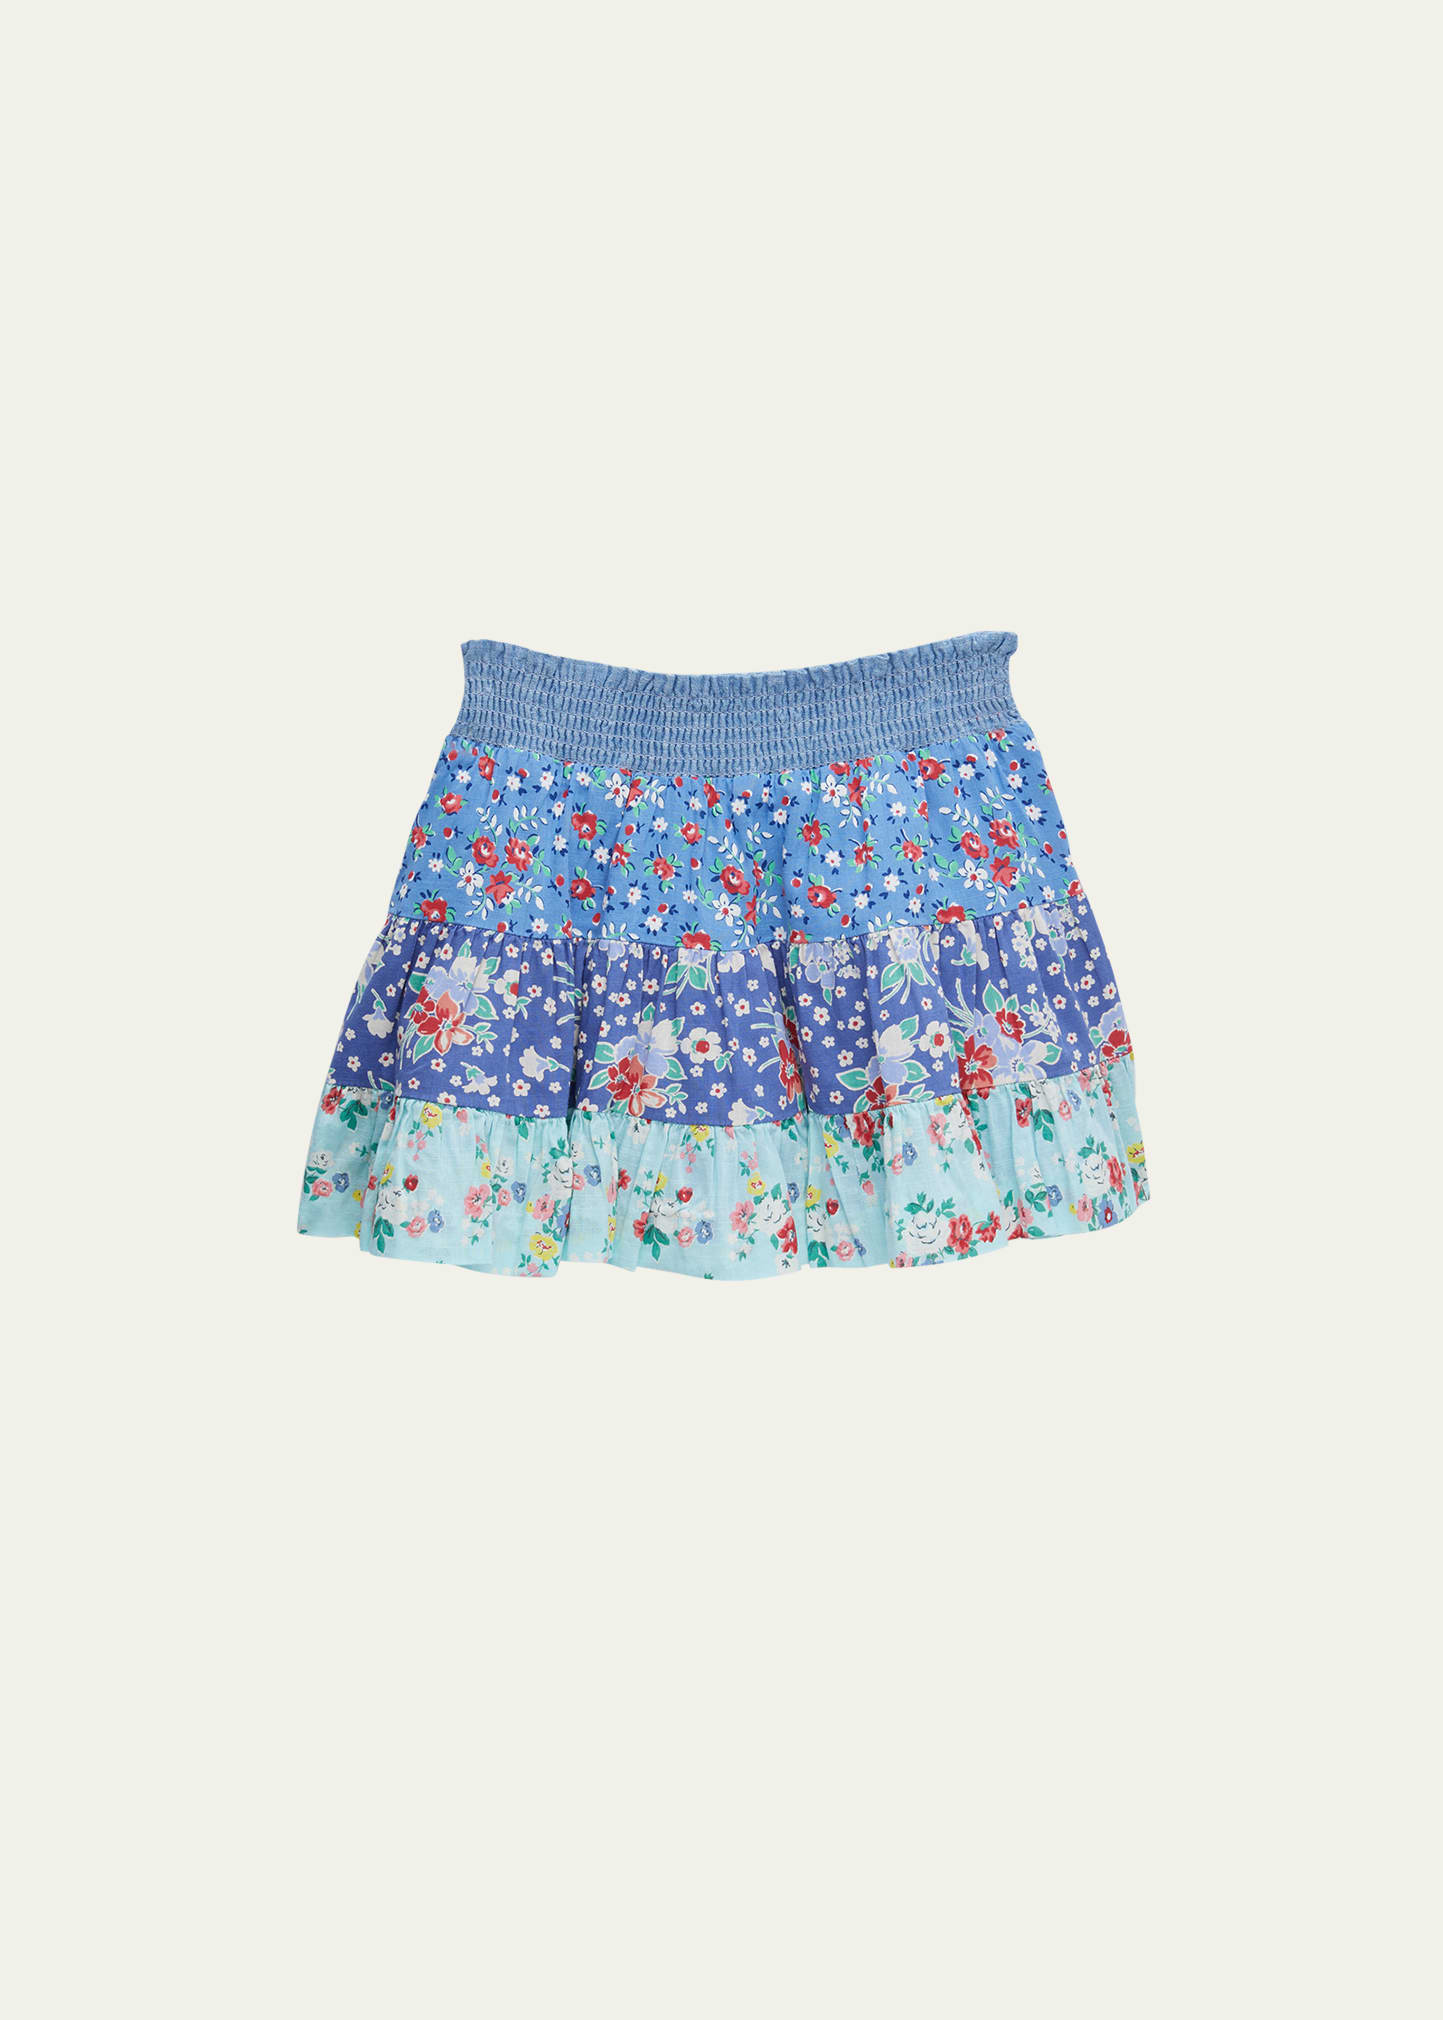 Girl's Mixed Floral-Prints Tiered Skirt, Size 2-4